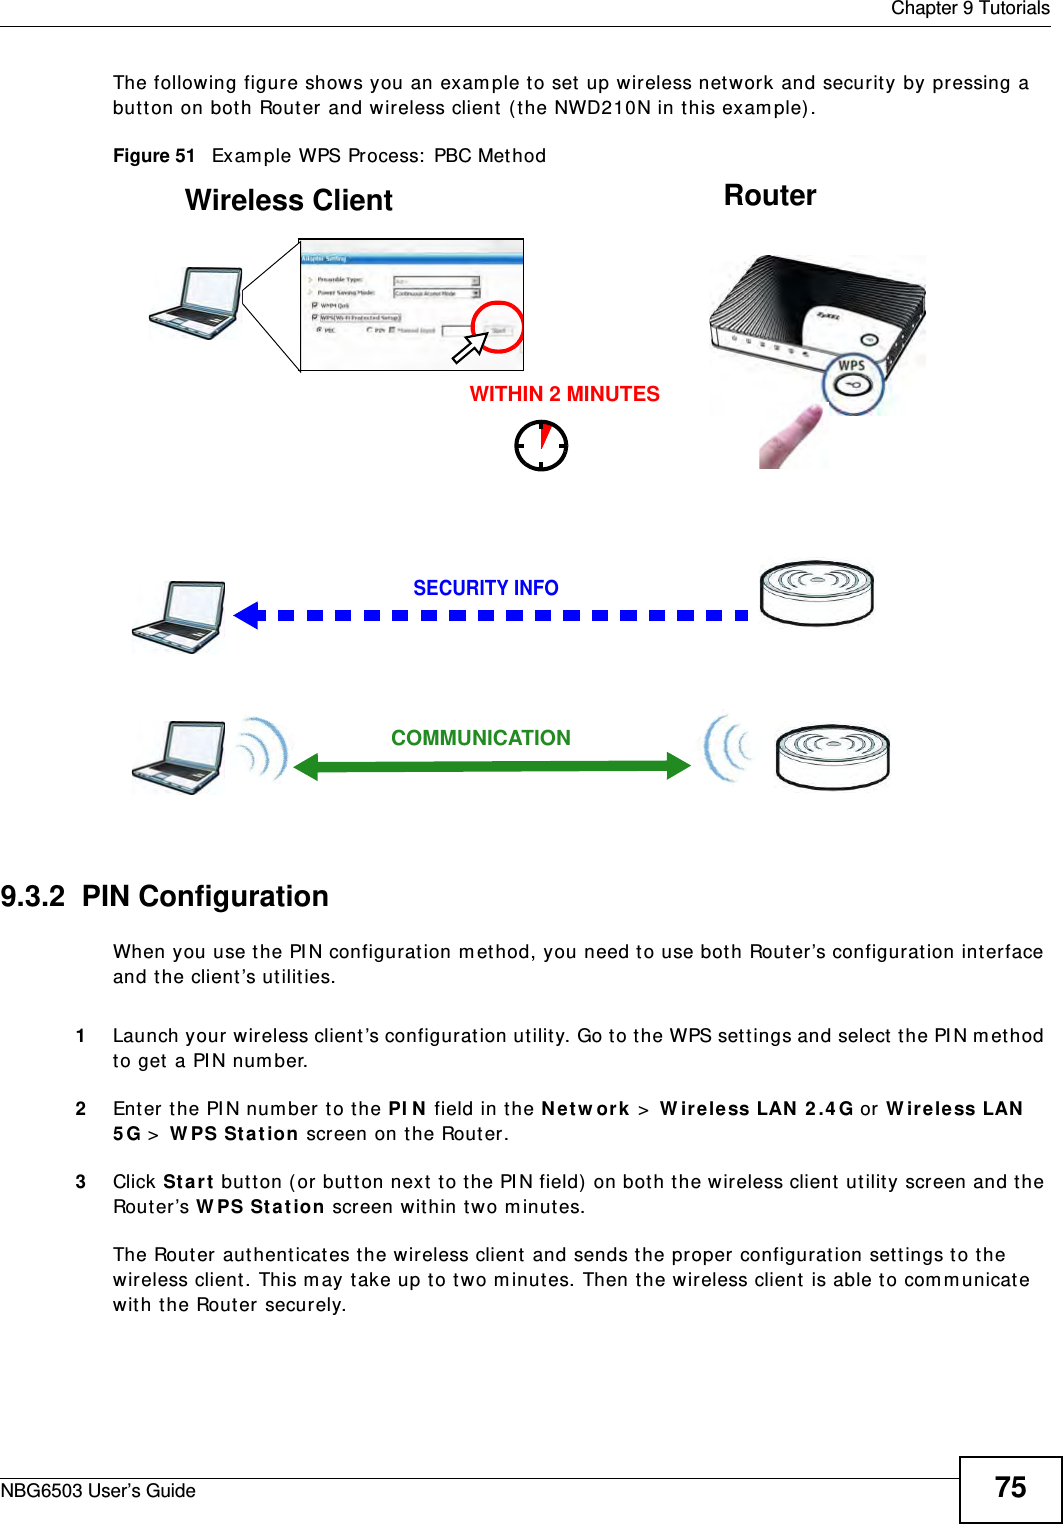  Chapter 9 TutorialsNBG6503 User’s Guide 75The following figure shows you an example to set up wireless network and security by pressing a button on both Router and wireless client (the NWD210N in this example).Figure 51   Example WPS Process: PBC Method9.3.2  PIN ConfigurationWhen you use the PIN configuration method, you need to use both Router’s configuration interface and the client’s utilities.1Launch your wireless client’s configuration utility. Go to the WPS settings and select the PIN method to get a PIN number.2Enter the PIN number to the PIN field in the Network &gt; Wireless LAN 2.4G or Wireless LAN 5G &gt; WPS Station screen on the Router.3Click Start button (or button next to the PIN field) on both the wireless client utility screen and the Router’s WPS Station screen within two minutes.The Router authenticates the wireless client and sends the proper configuration settings to the wireless client. This may take up to two minutes. Then the wireless client is able to communicate with the Router securely. Wireless Client    RouterSECURITY INFOCOMMUNICATIONWITHIN 2 MINUTES